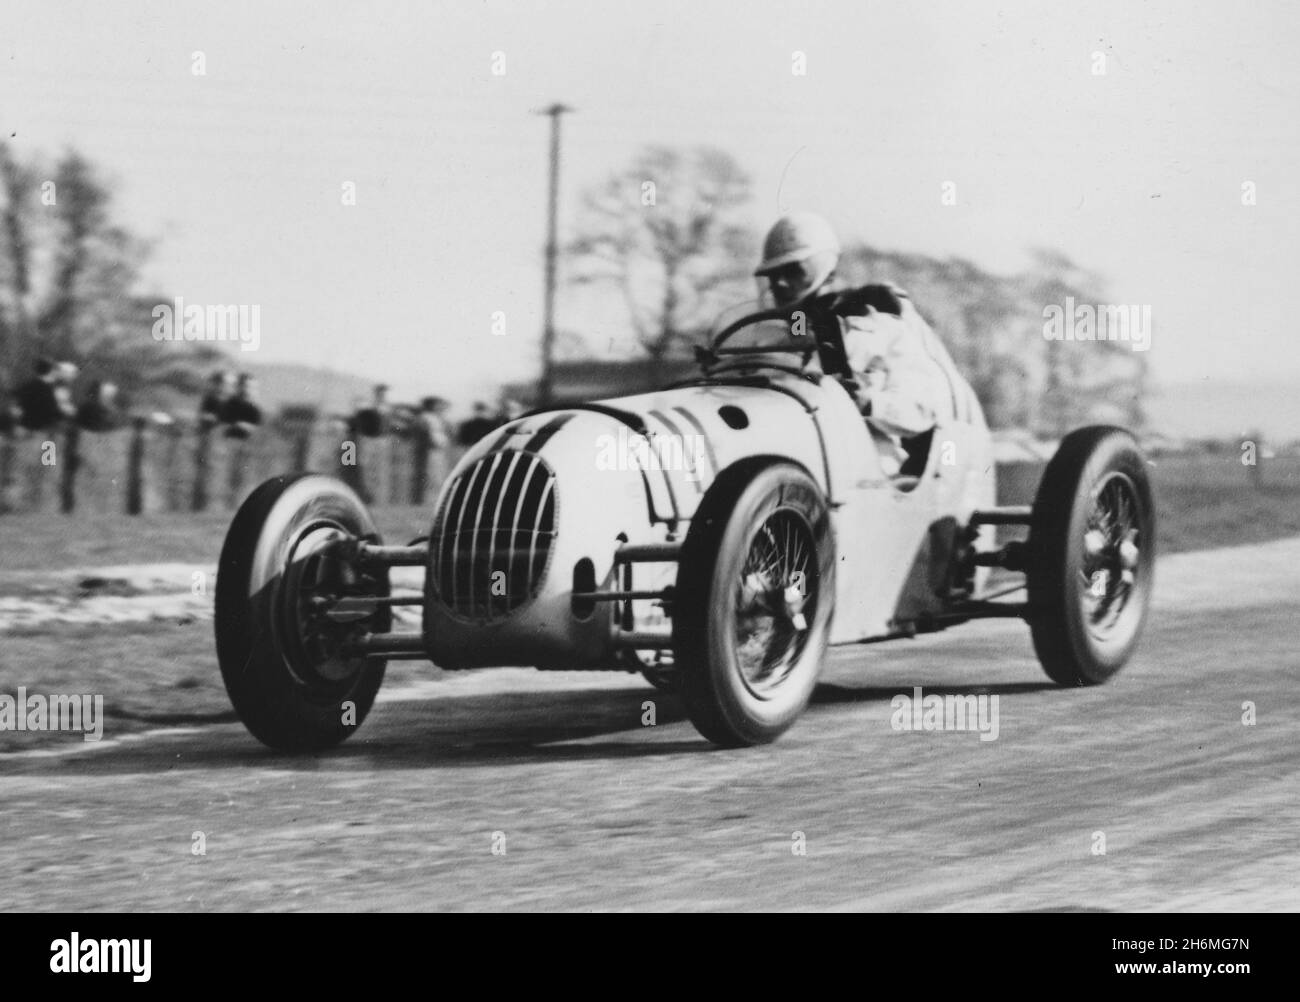 George Abecassis, supercharged 1488cc, 4 cyl  Alta at  Donington Park near Derby. 1st April 1939. BRDC organised British Empire Trophy Race. Photograph taken by T W Green, who was a Nottingham Journal press photographer at the time. Stock Photo